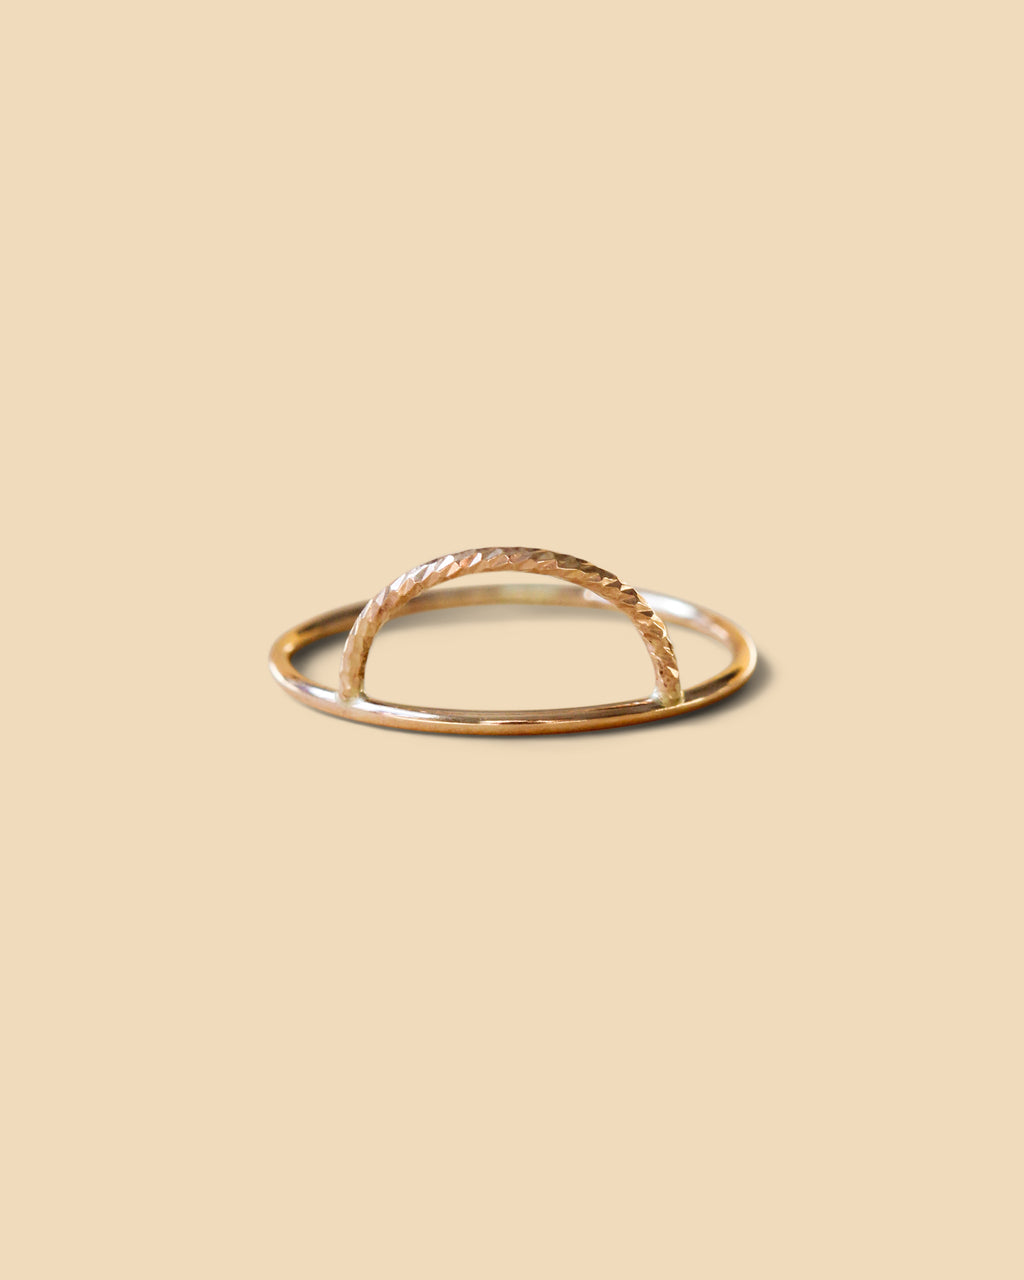 klap Druif Pessimist Lenora sun ring. Half moon wire ring - Everly Made